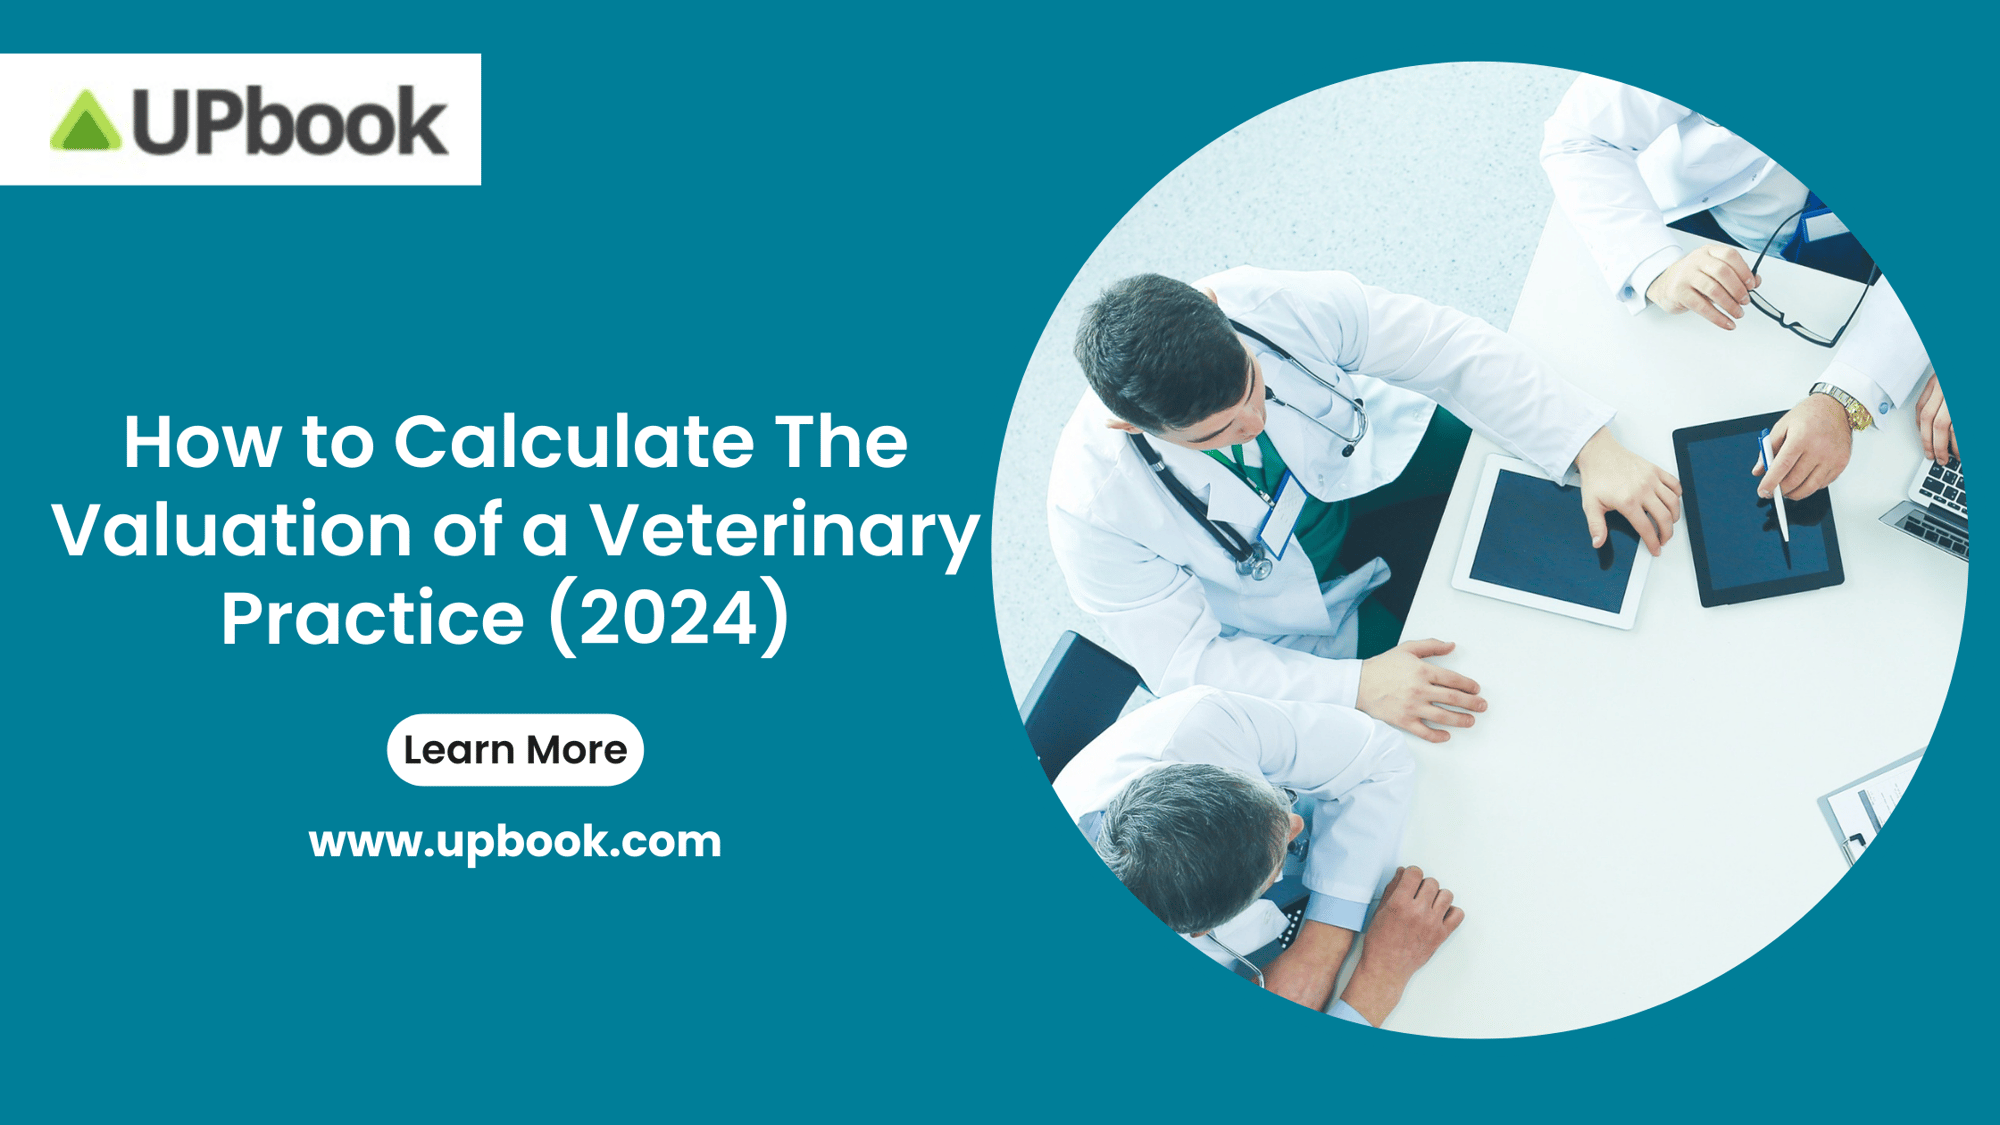 How to calculate the valuation of a veterinary practice